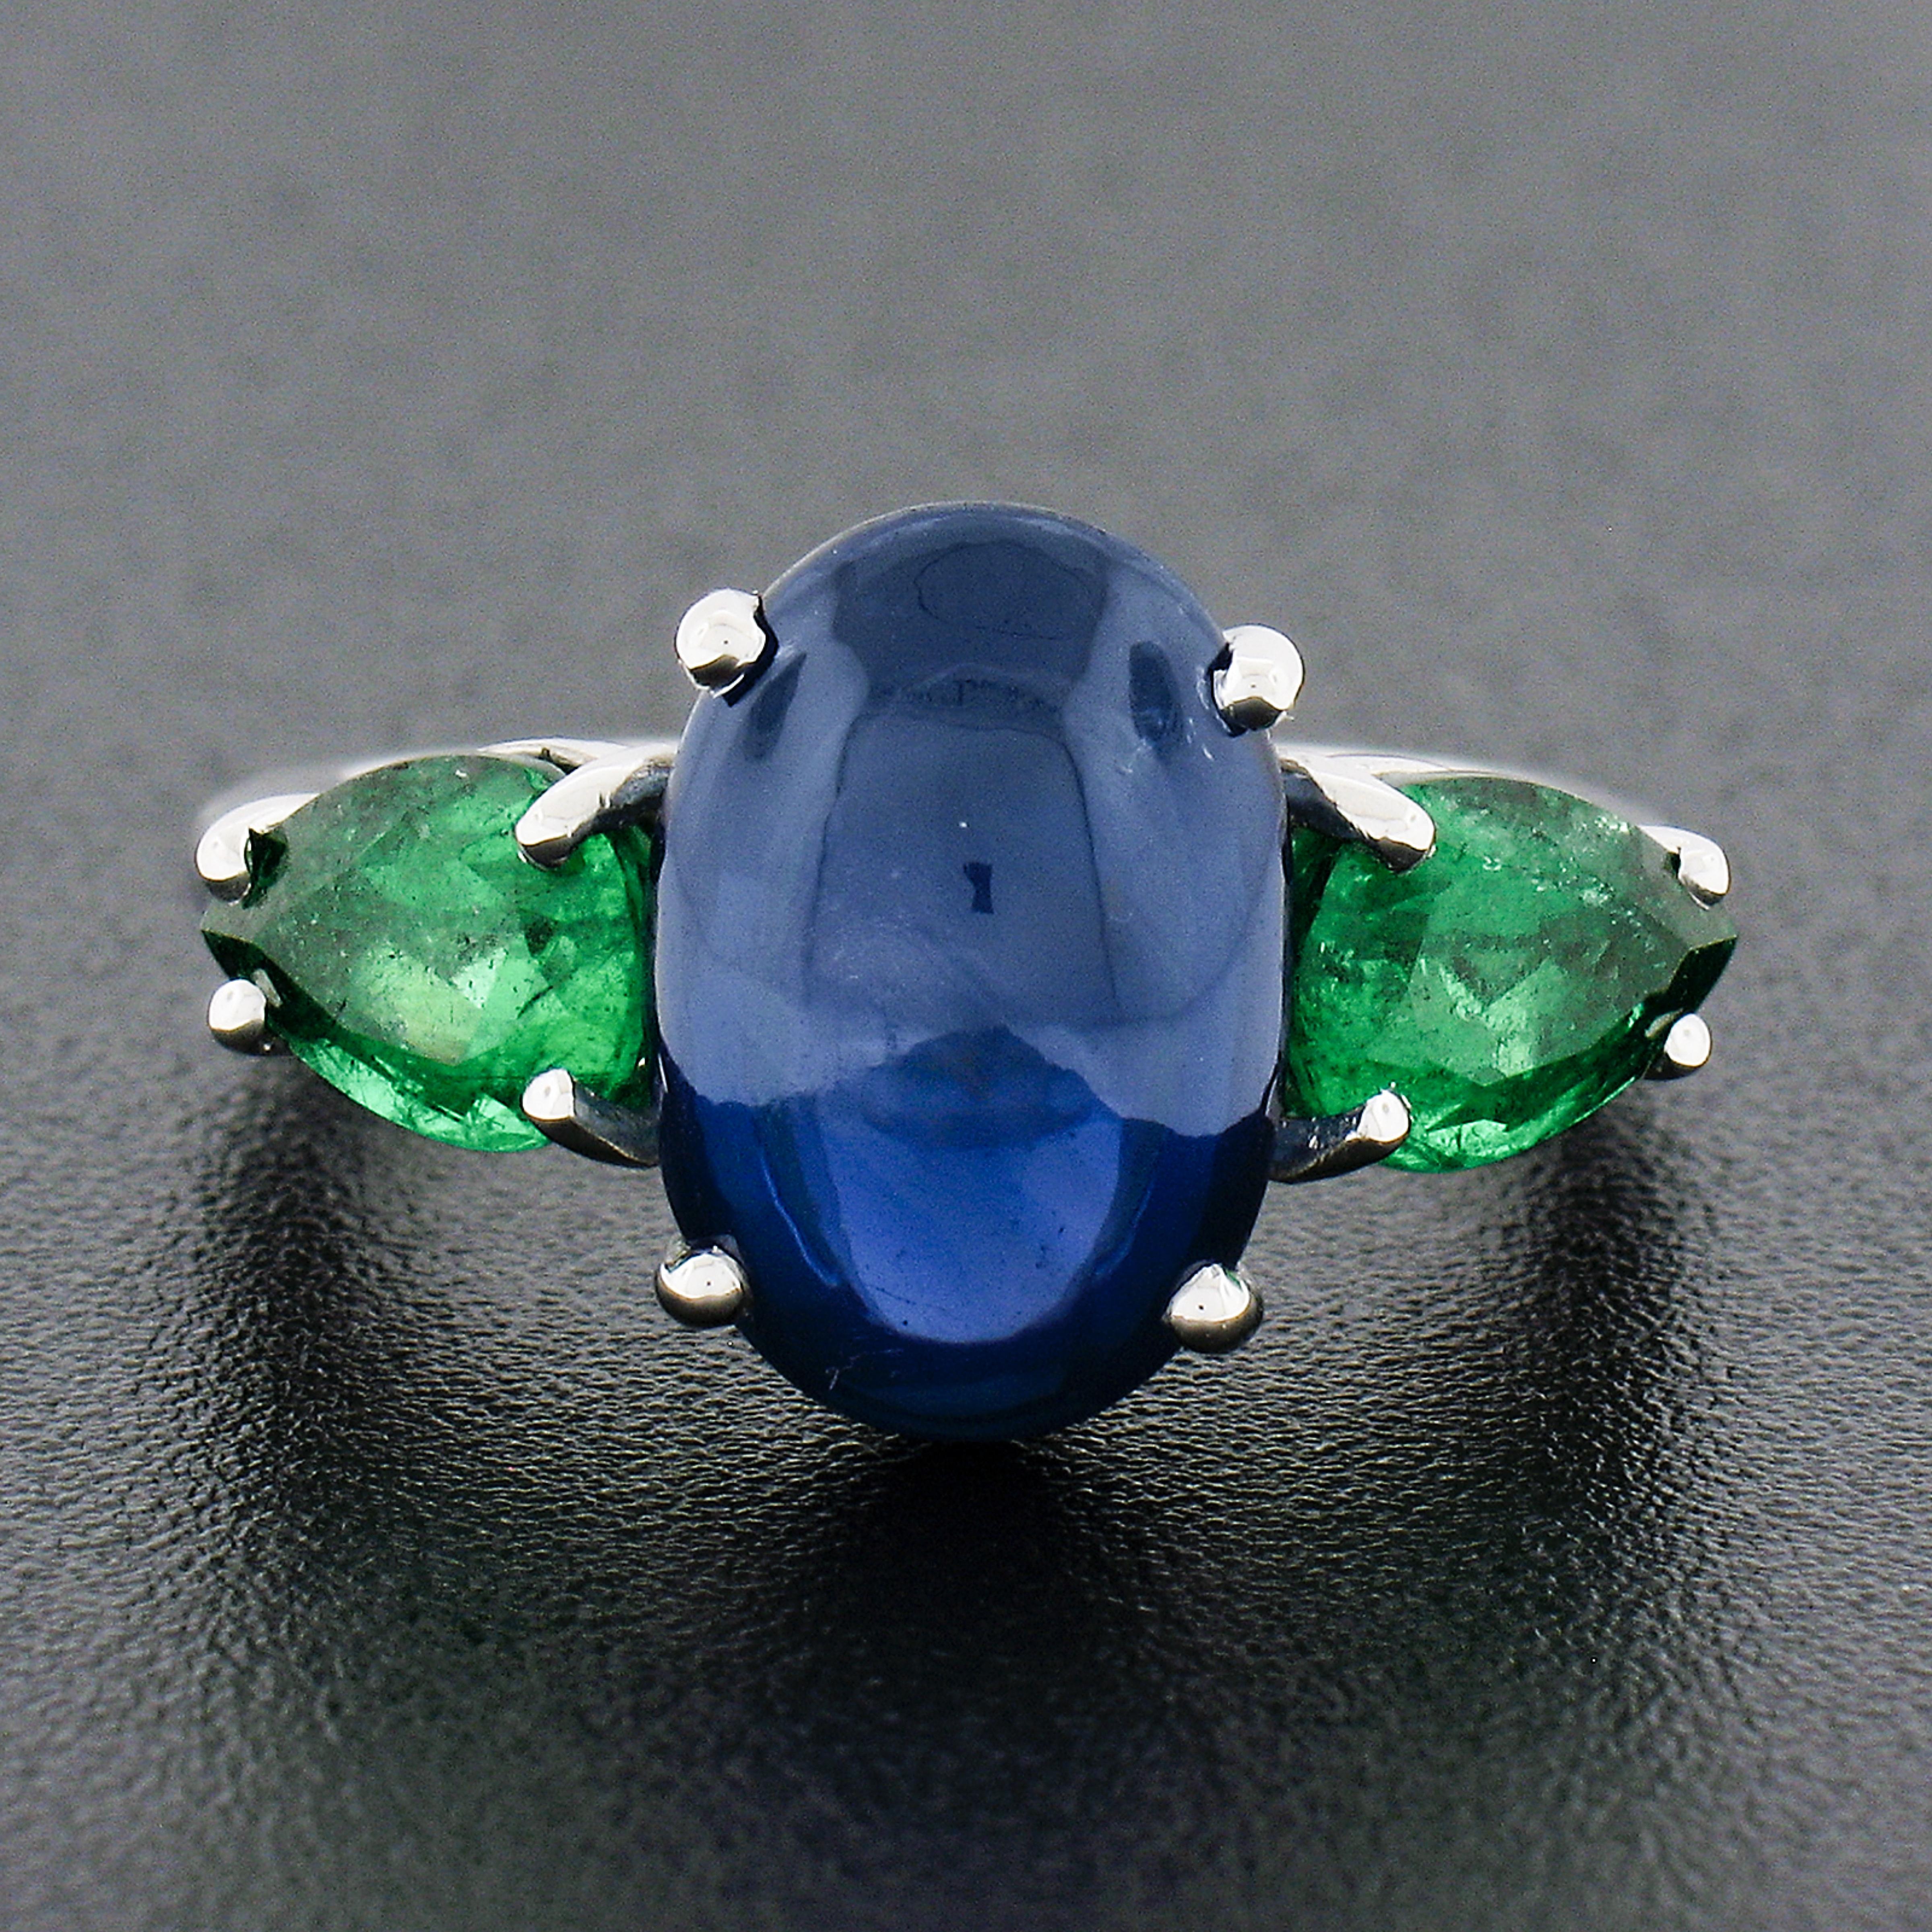 You are looking at an absolutely breathtaking, vintage, sapphire and emerald three stone ring that is very well crafted in solid platinum. The ring features a beautiful, GIA certified, elongated oval cabochon cut sapphire solitaire neatly prong set